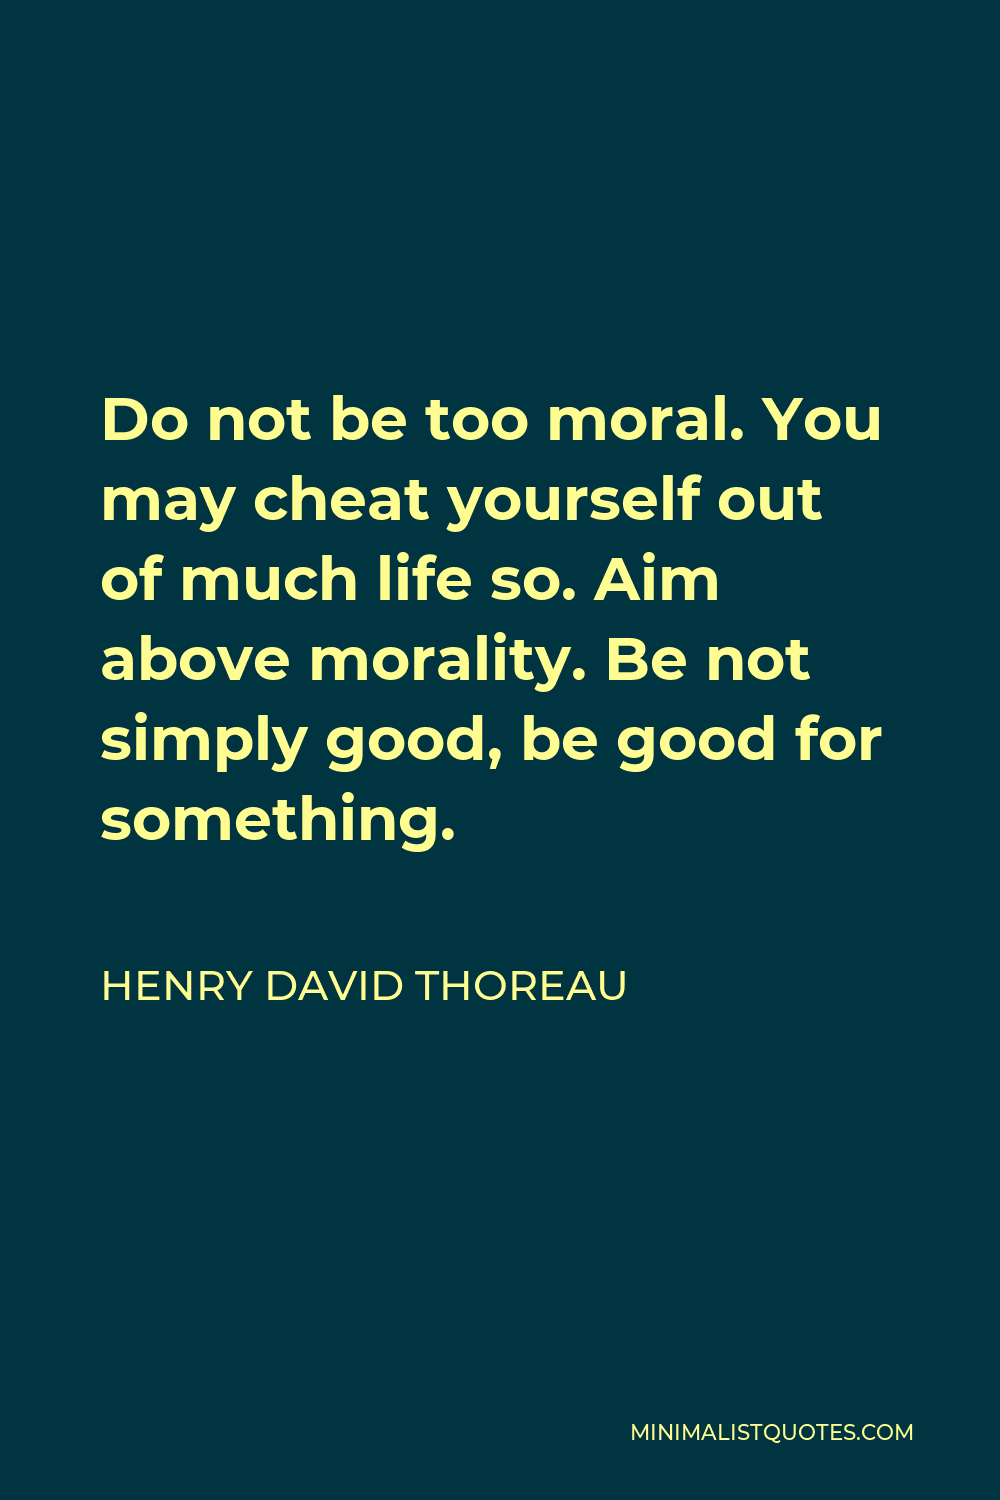 Henry David Thoreau Quote - Do not be too moral. You may cheat yourself out of much life so. Aim above morality. Be not simply good, be good for something.